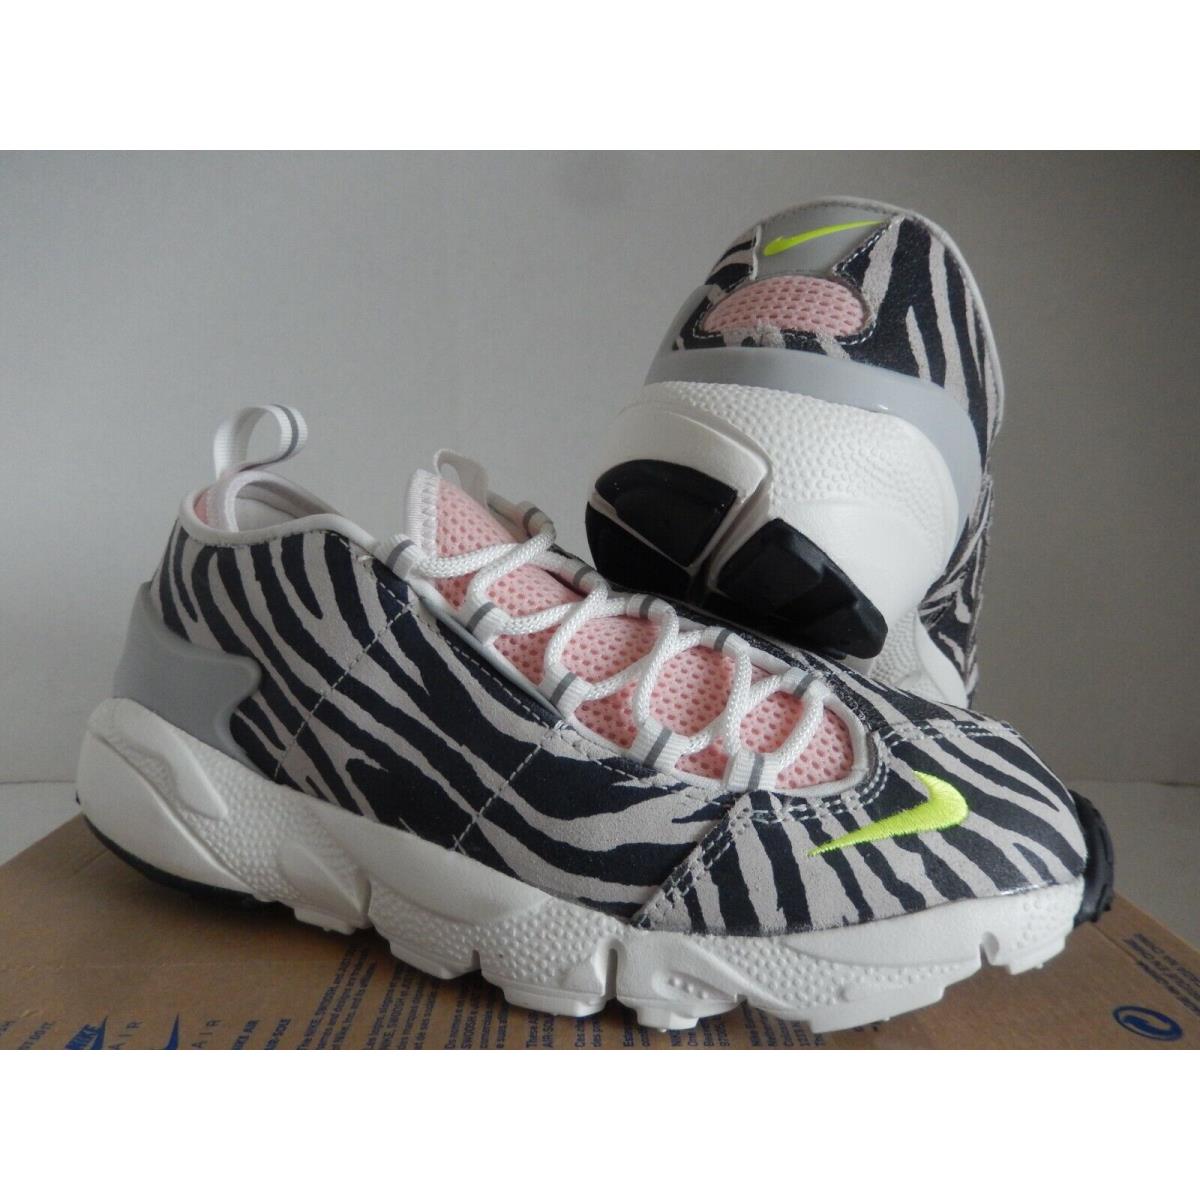 Nike shoes Air Footscape - White 0